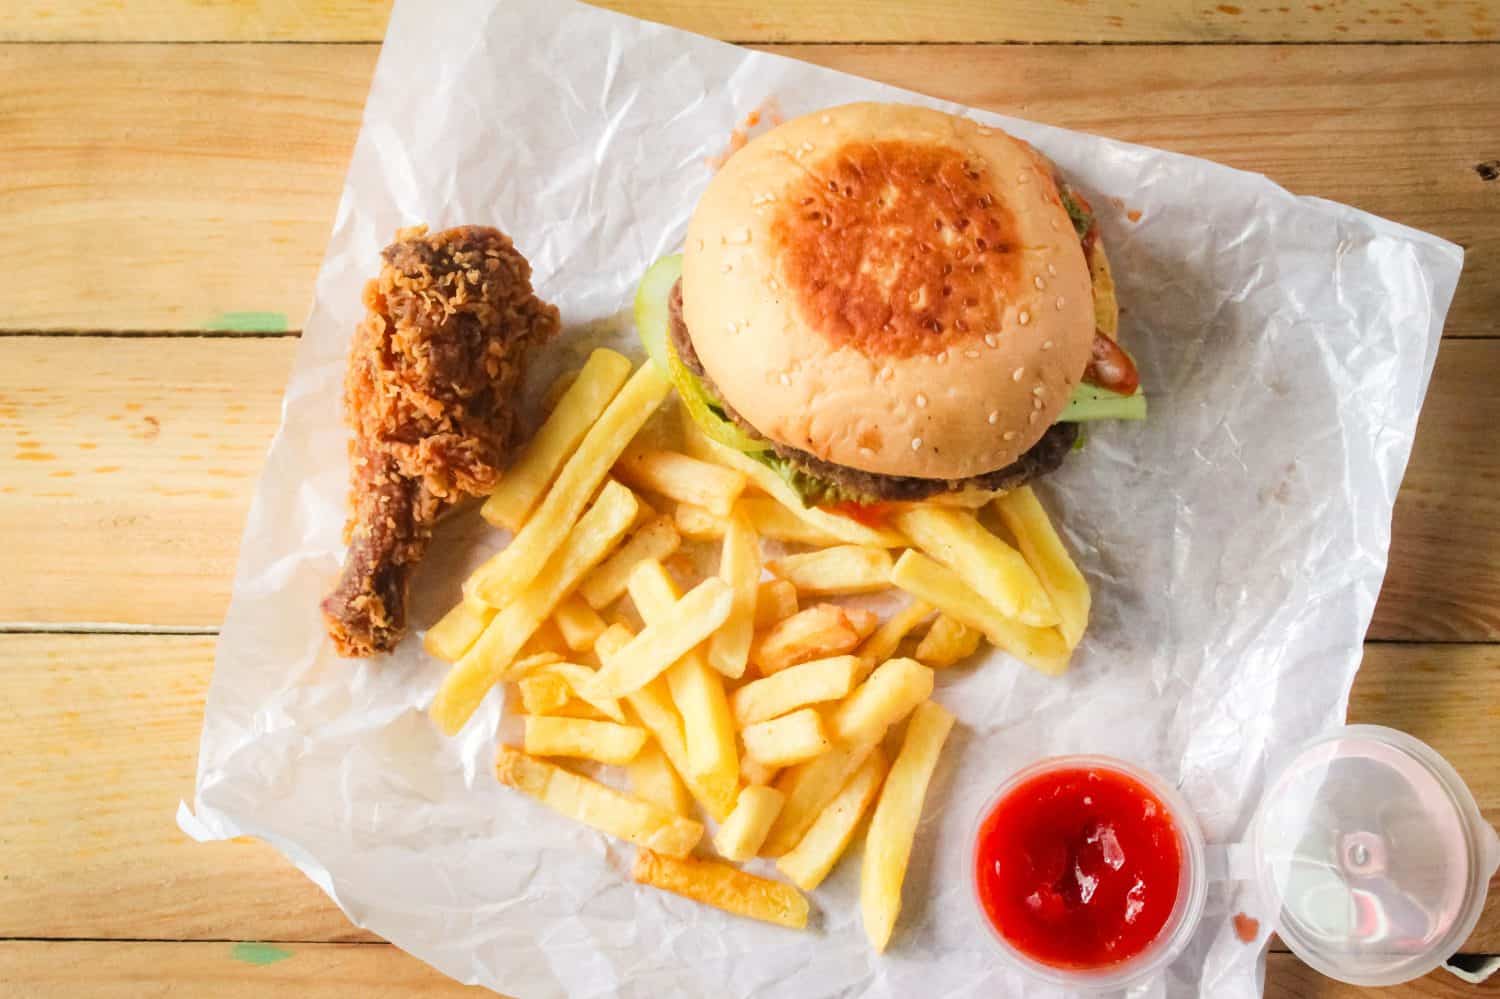 several types of fast food such as hamburgers, french fries, fried chicken and tomato sauce on a wooden table.